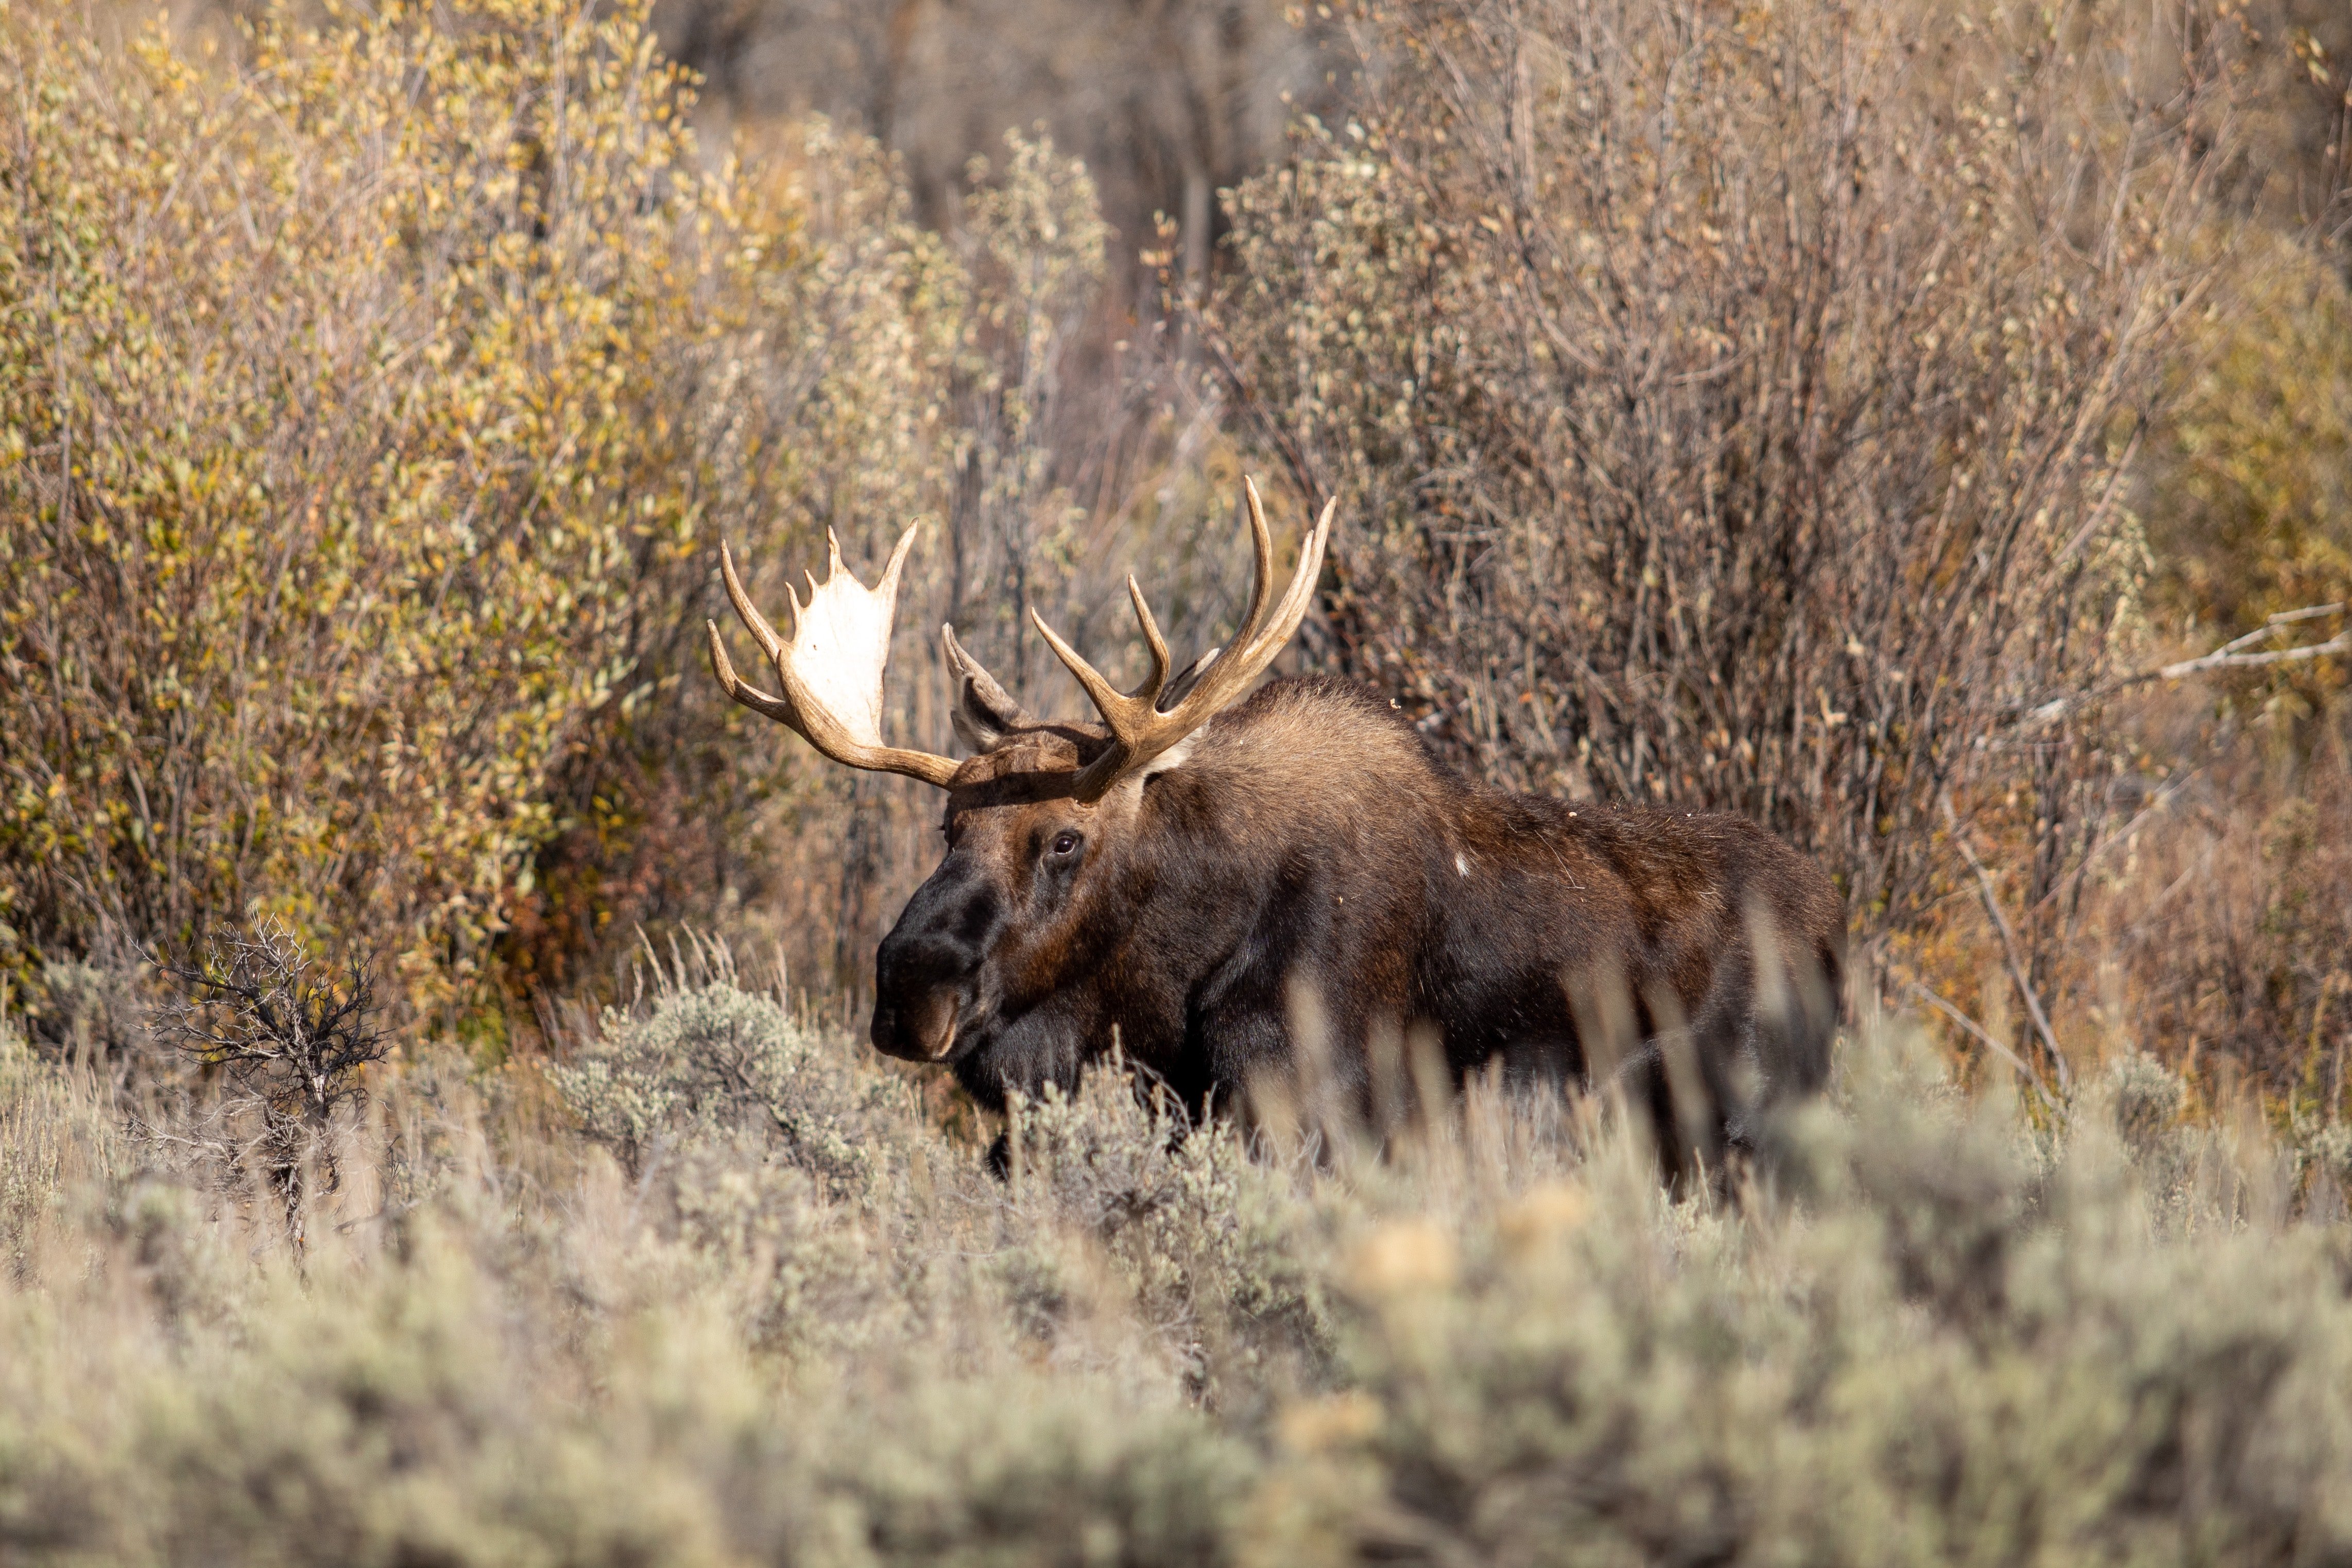 After hearing the rustle, Mike thought it was a moose in far sight. | Source: Unsplash